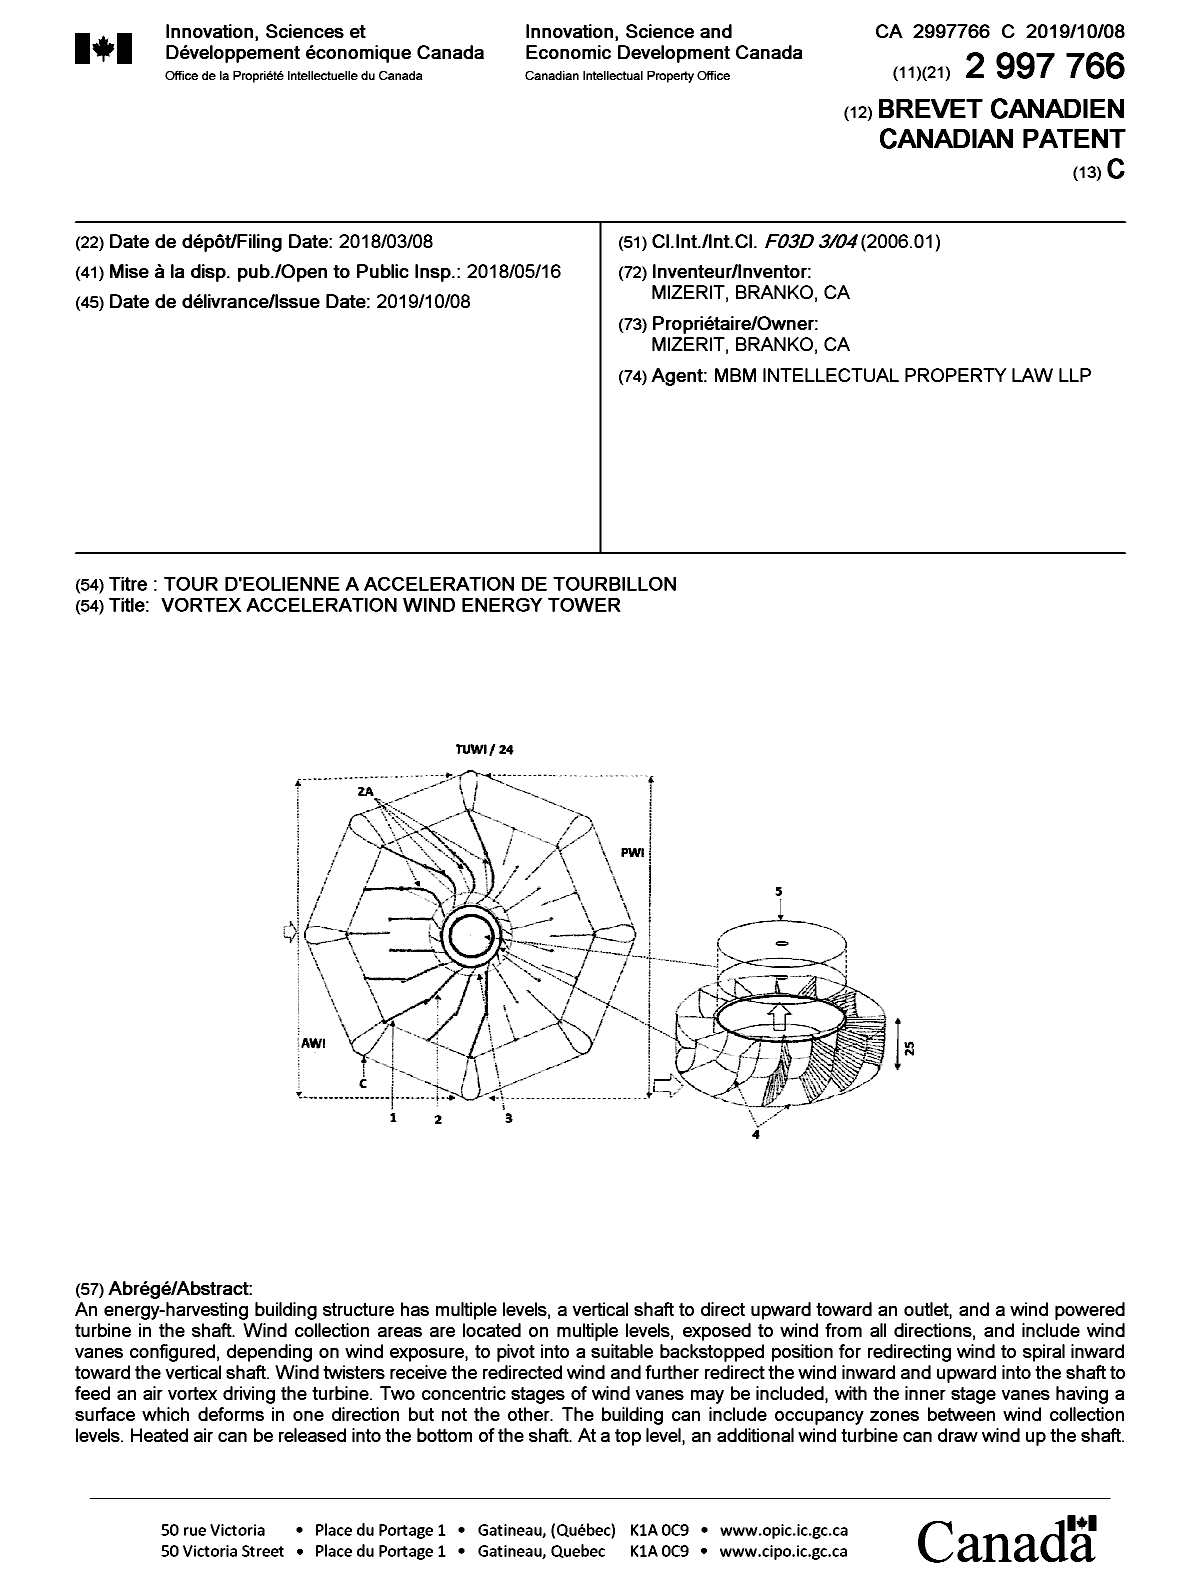 Canadian Patent Document 2997766. Cover Page 20190913. Image 1 of 1